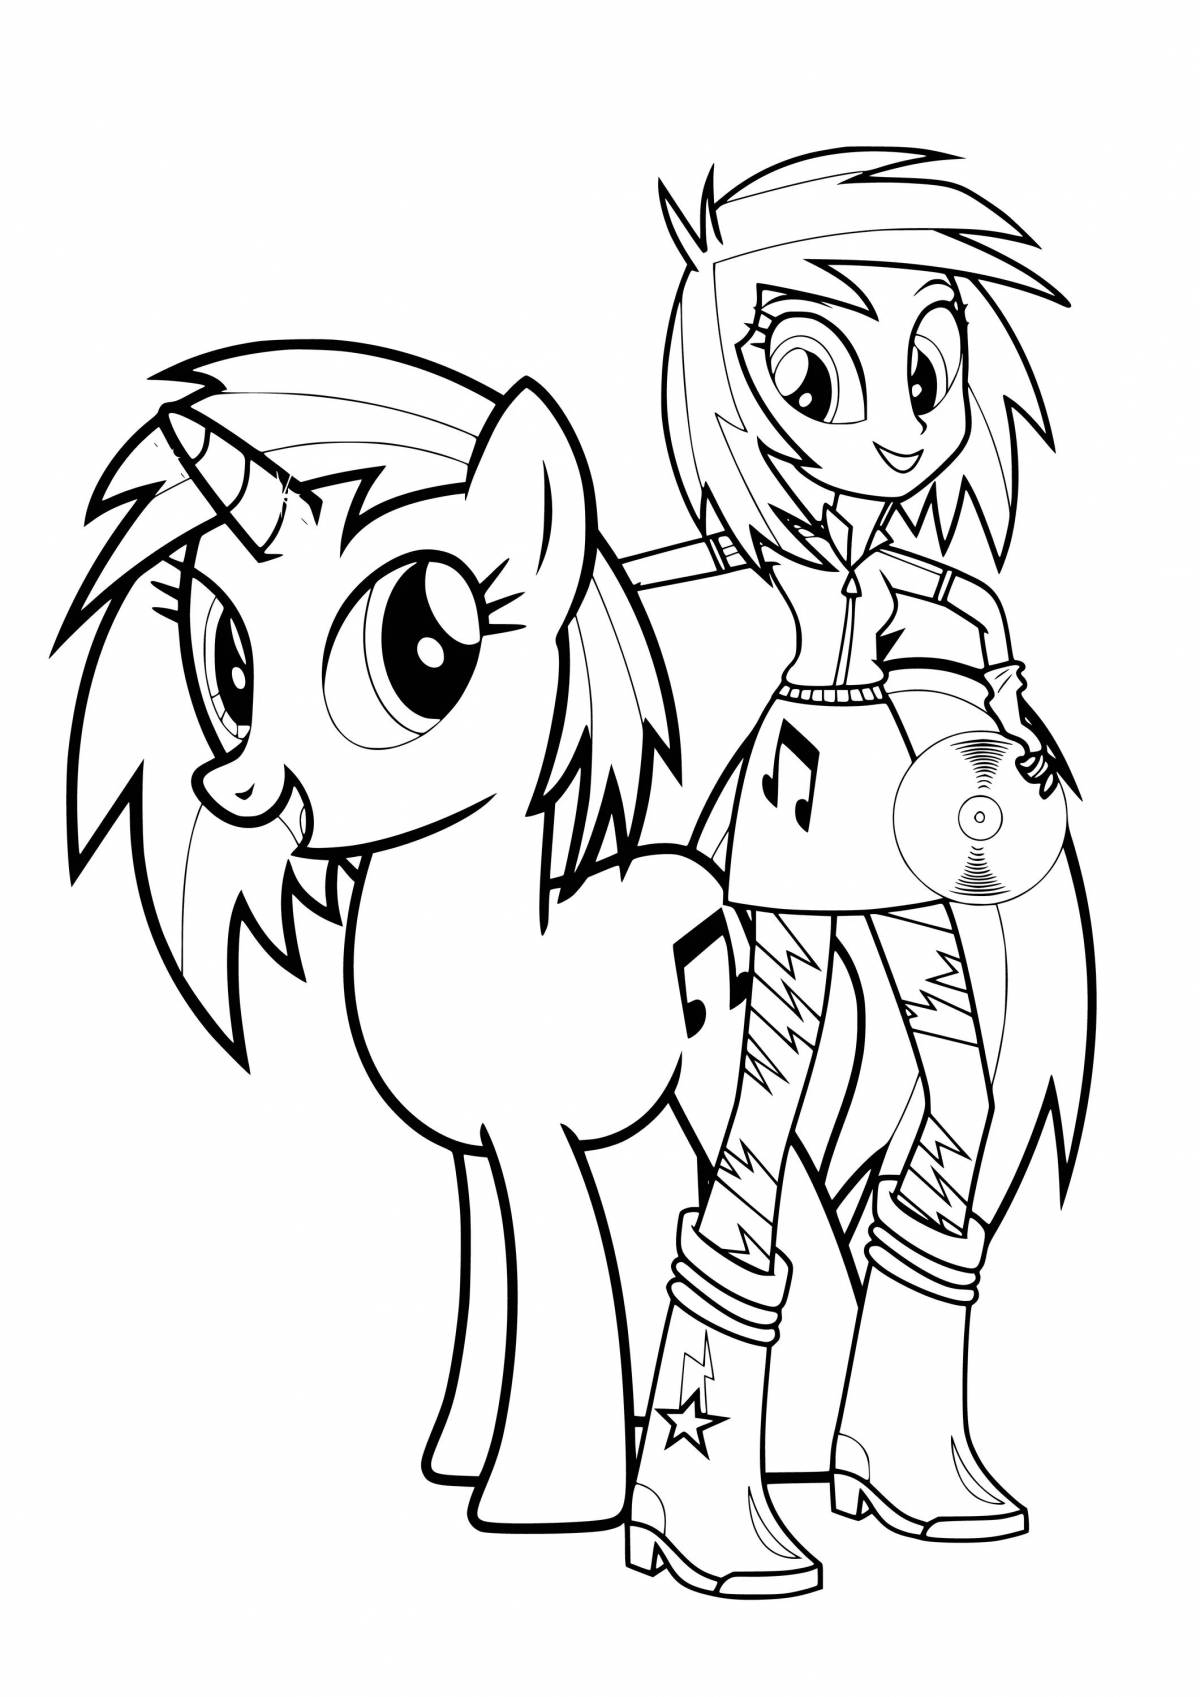 Coloring page glamor pony man